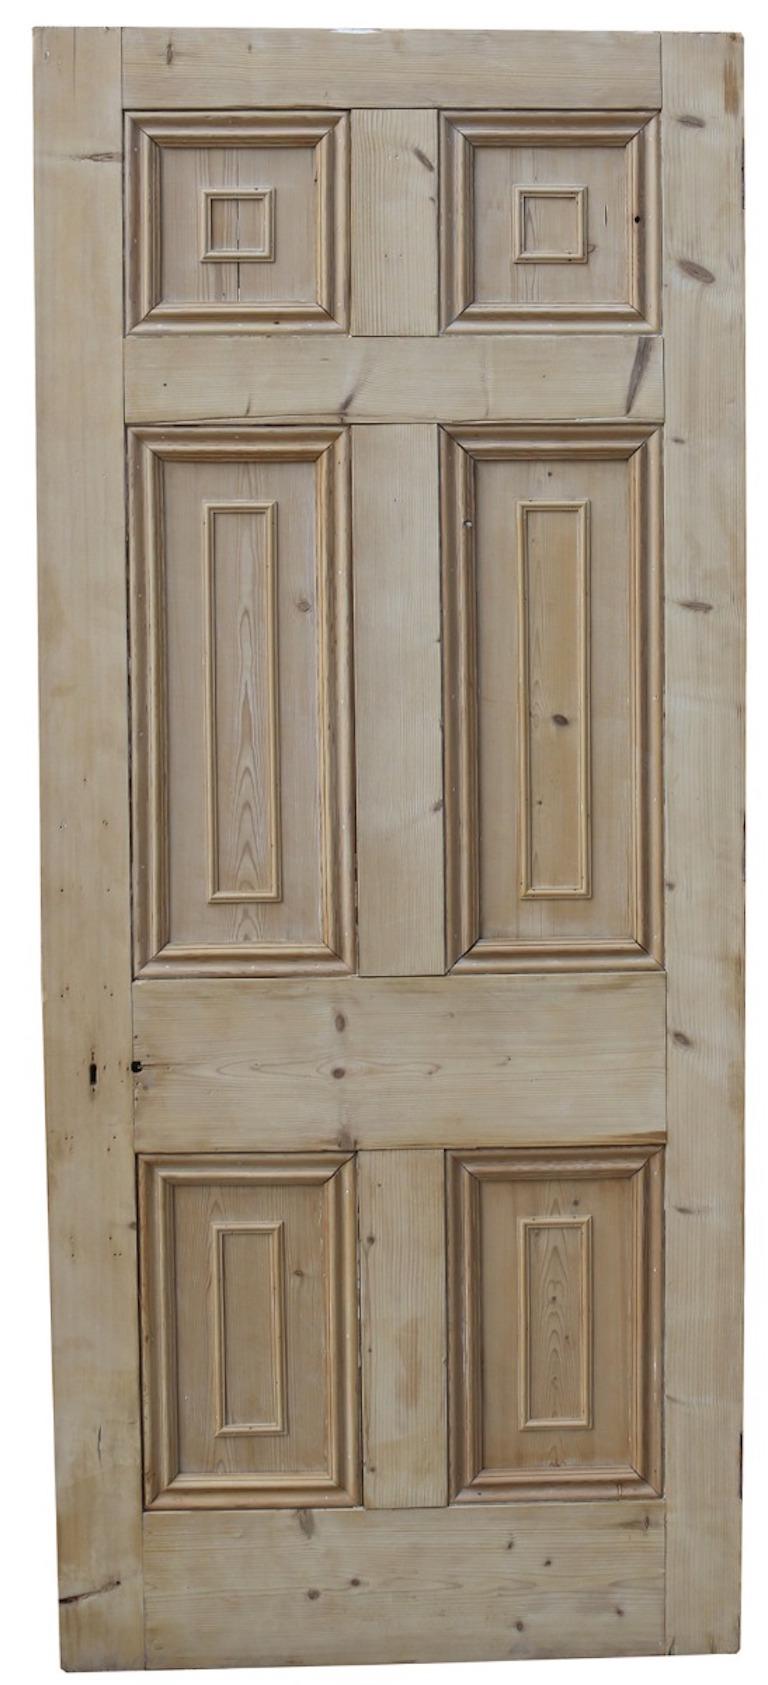 A George III period internal door. Constructed from pine, with a natural wood finish.